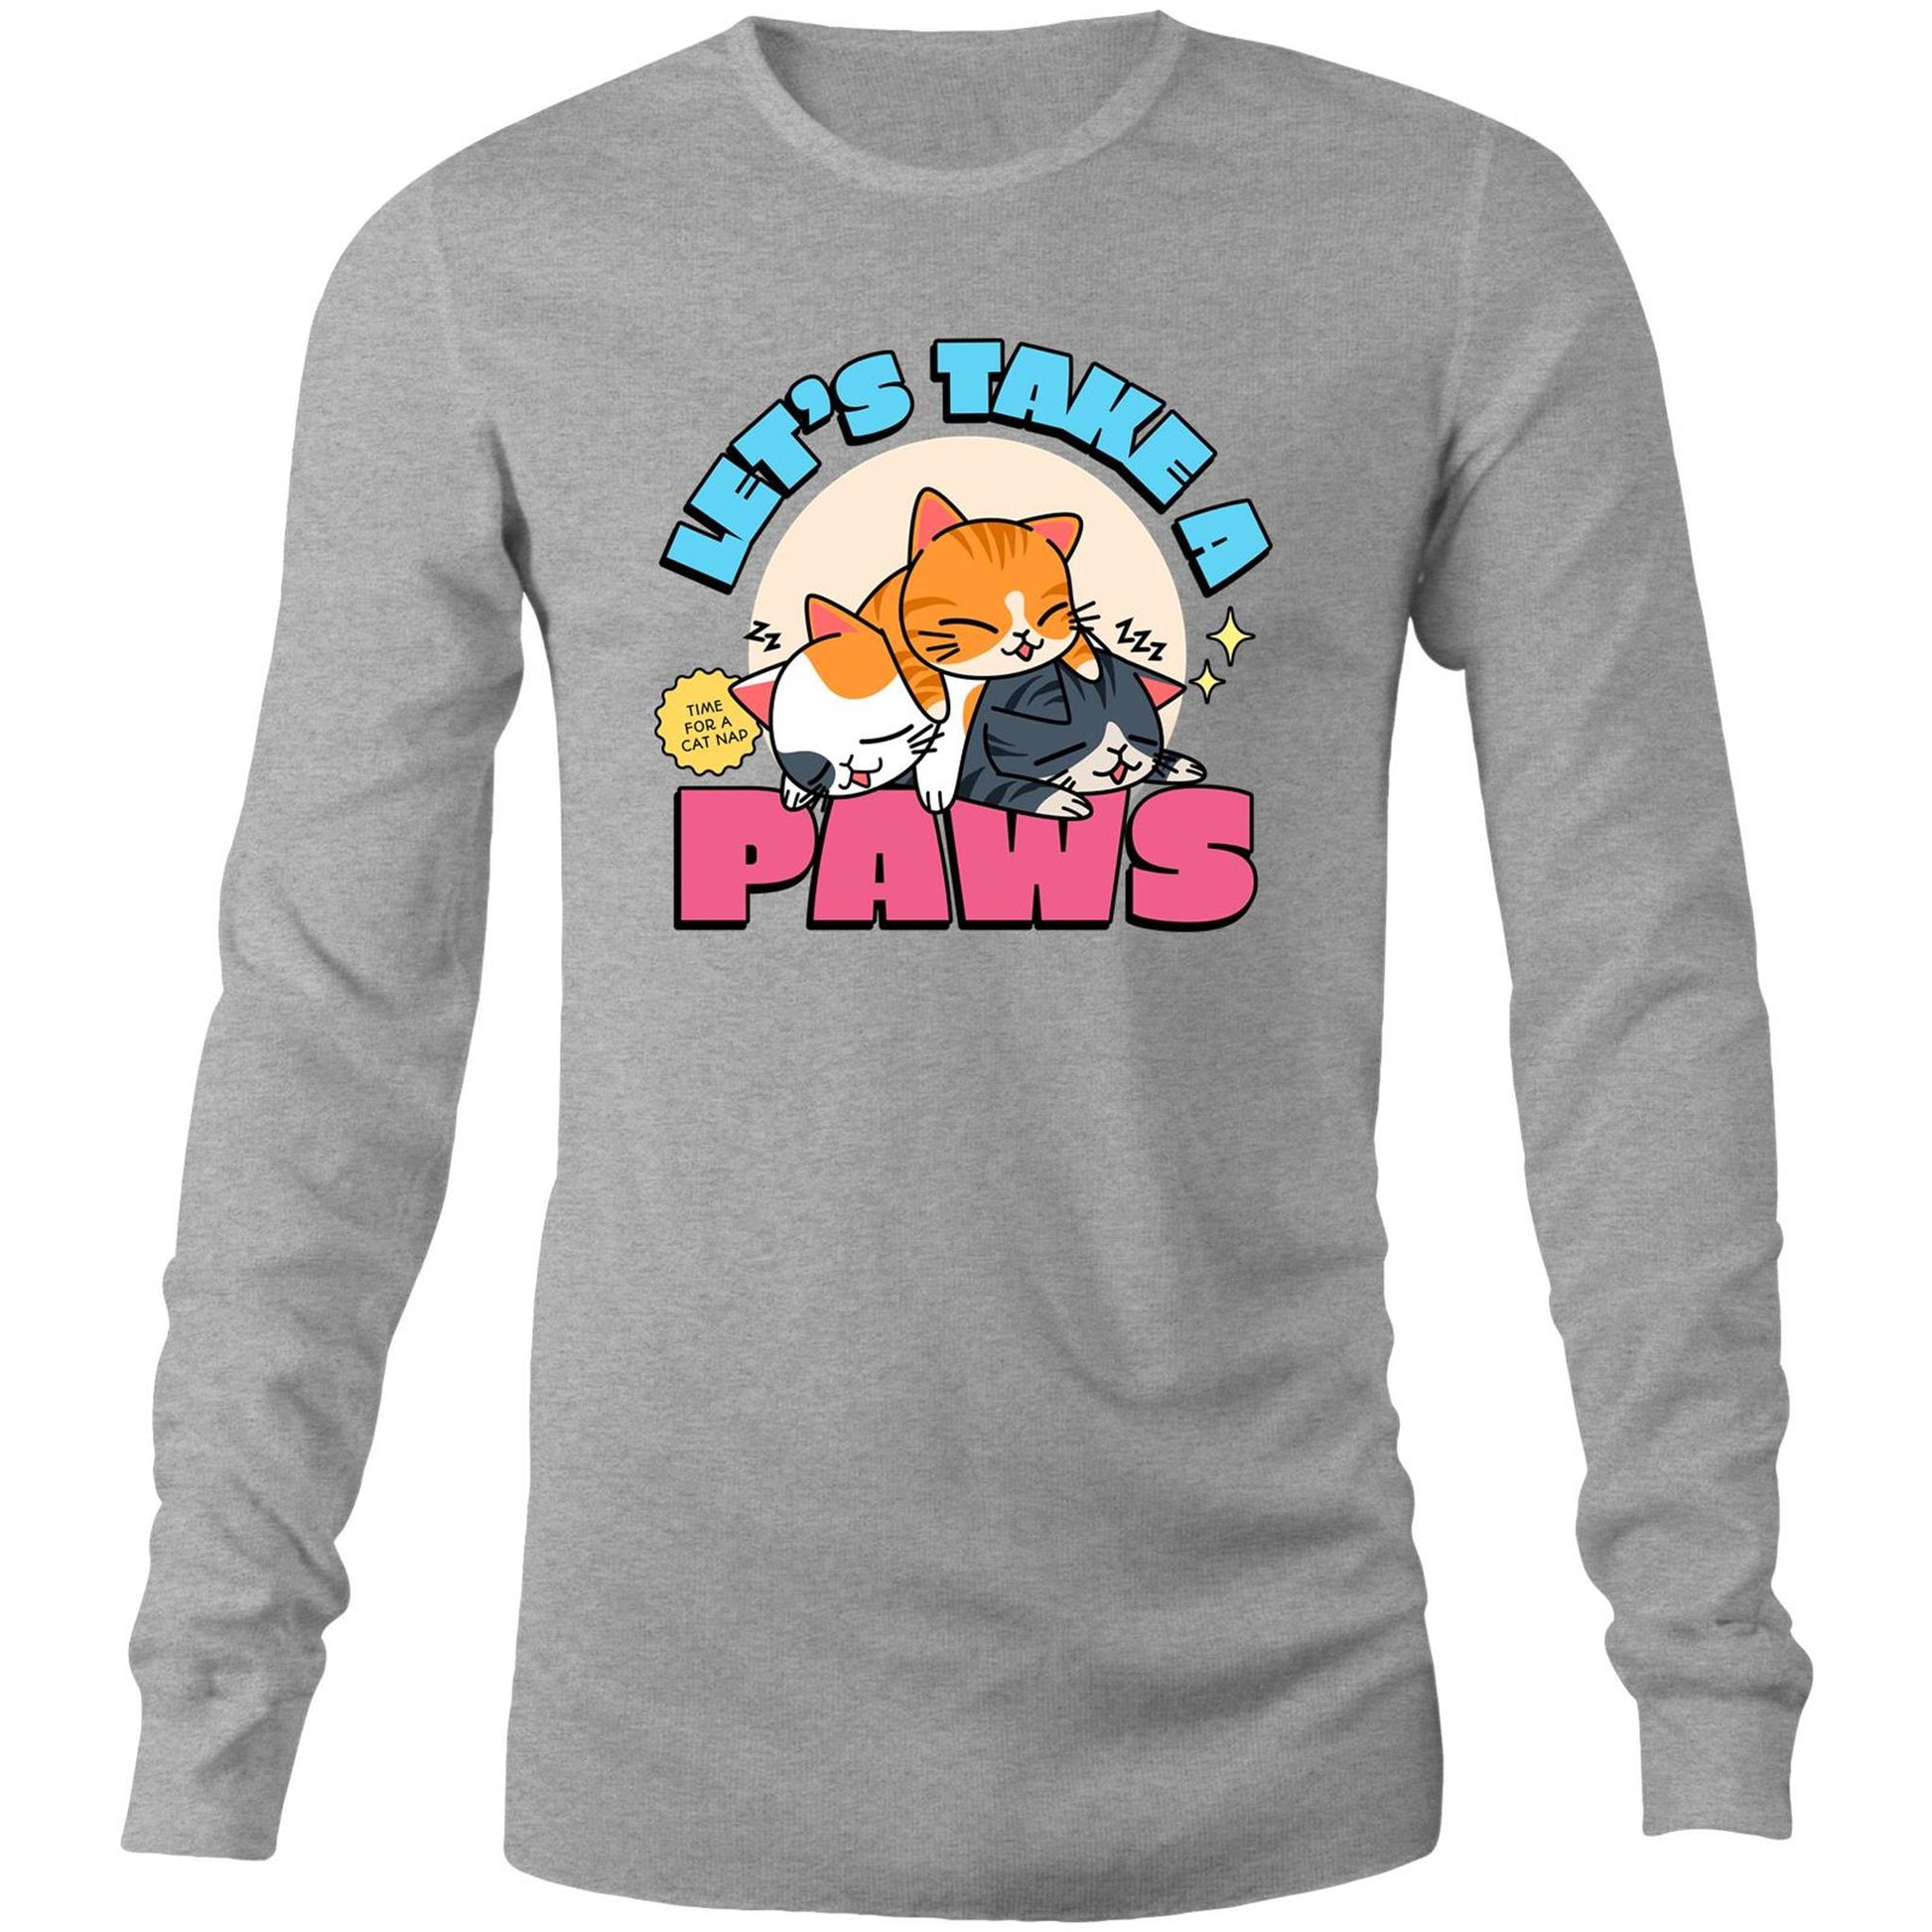 Let's Take A Paws, Time For A Cat Nap - Mens Long Sleeve T-Shirt Grey Marle Unisex Long Sleeve T-shirt animal